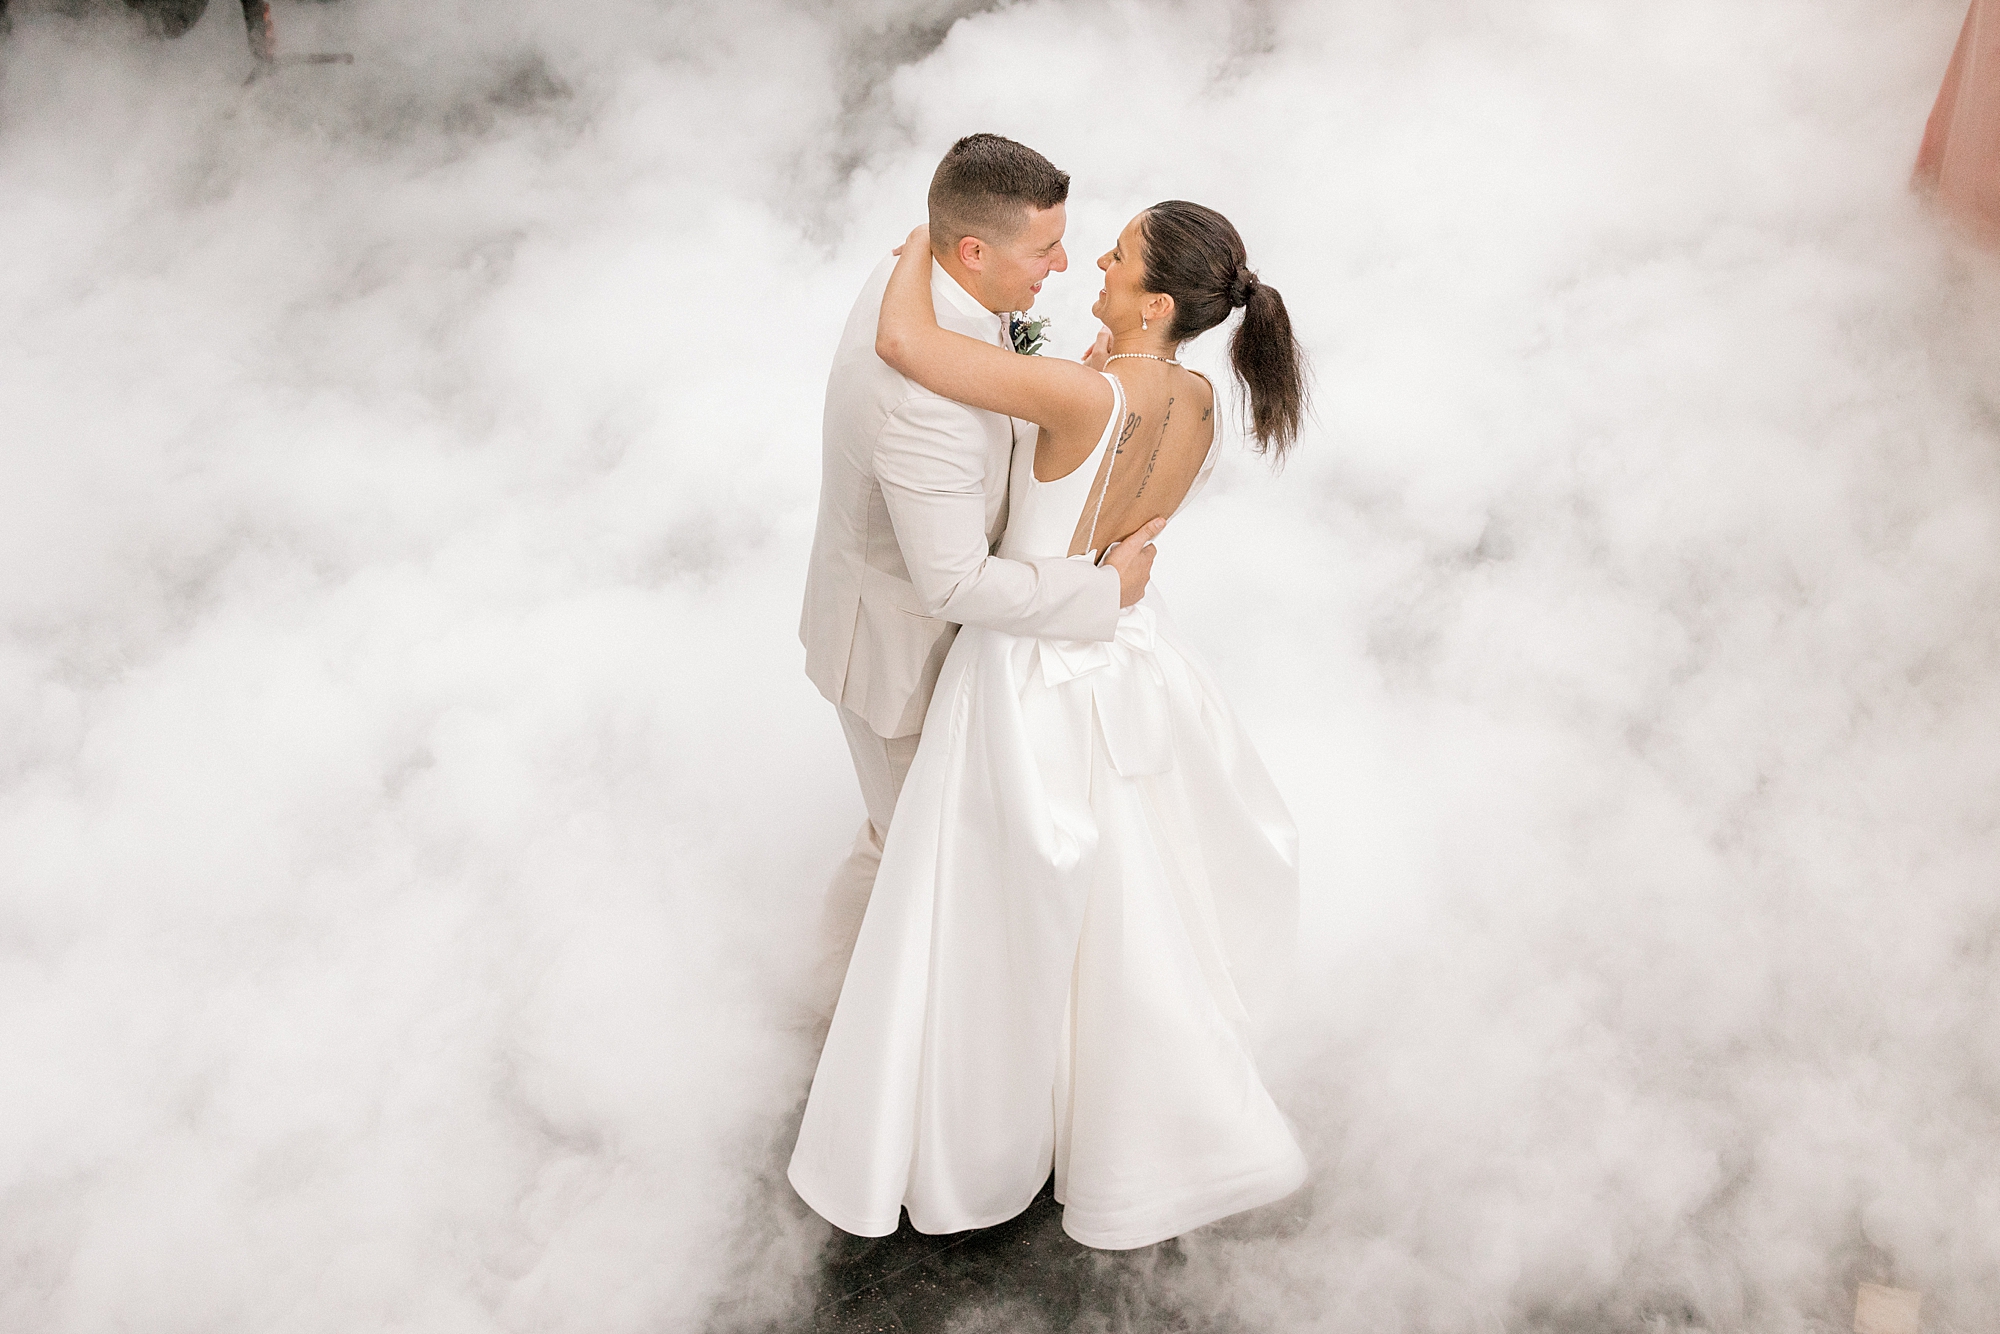 newlyweds dance during first dance with fog around them